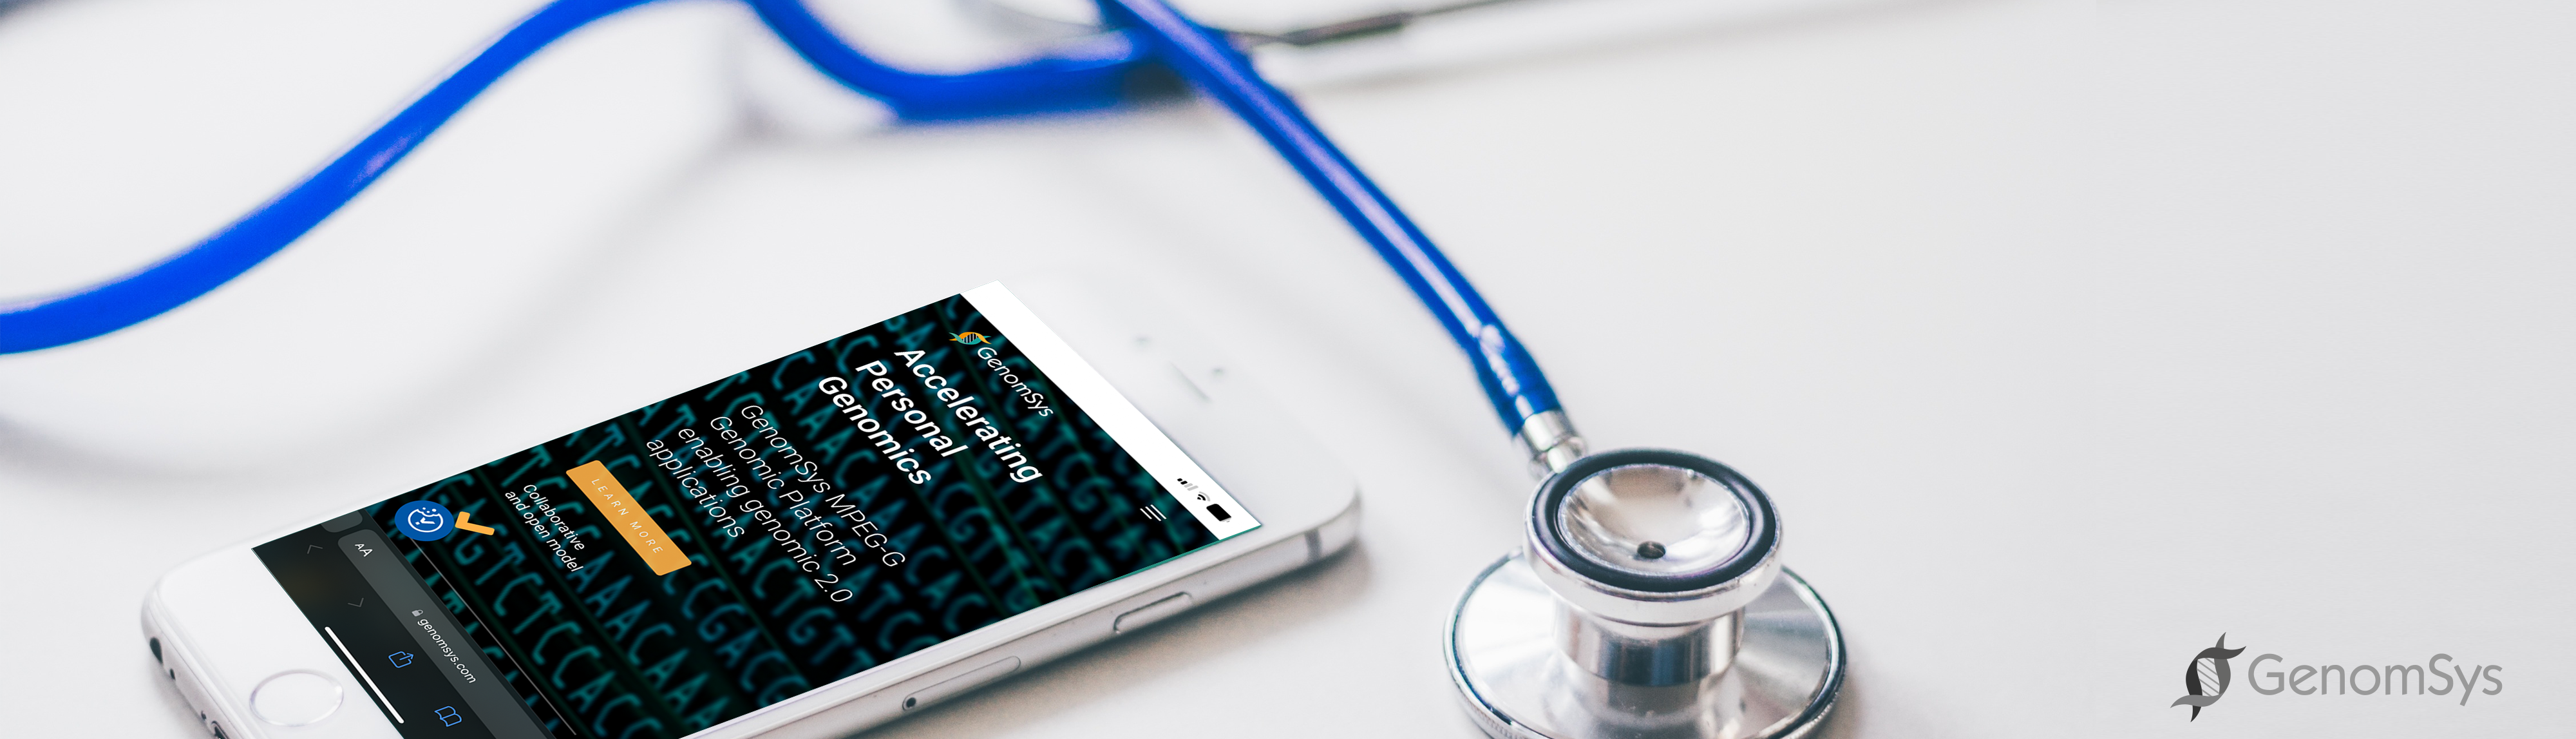 mHealth – the 21st century’s mobility in Healthcare – Part 1